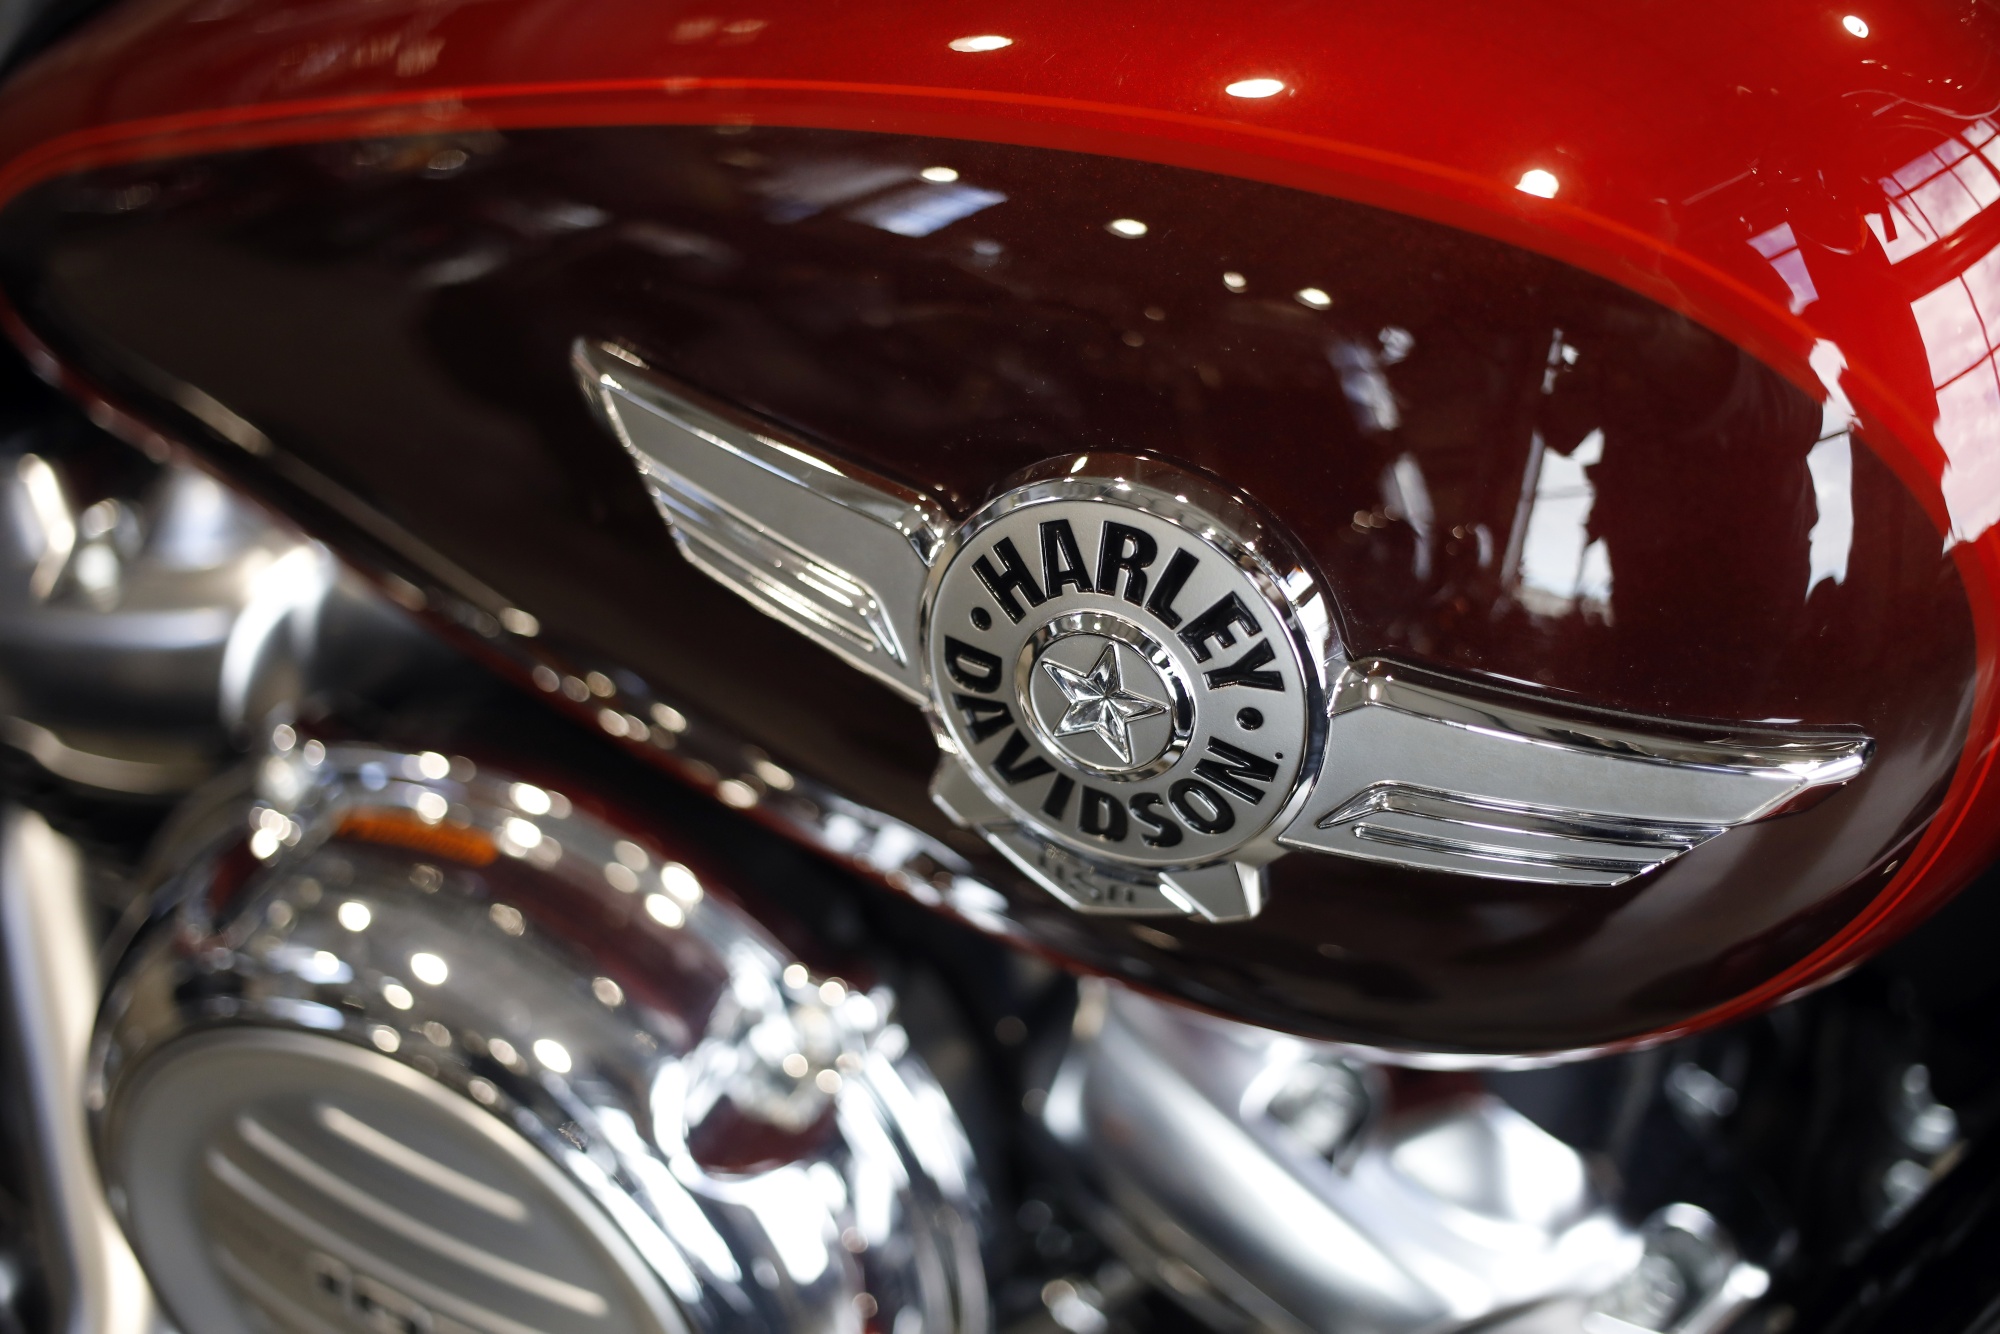 Harley-Davidson rides boom in leisure spending, lifting profit and shares